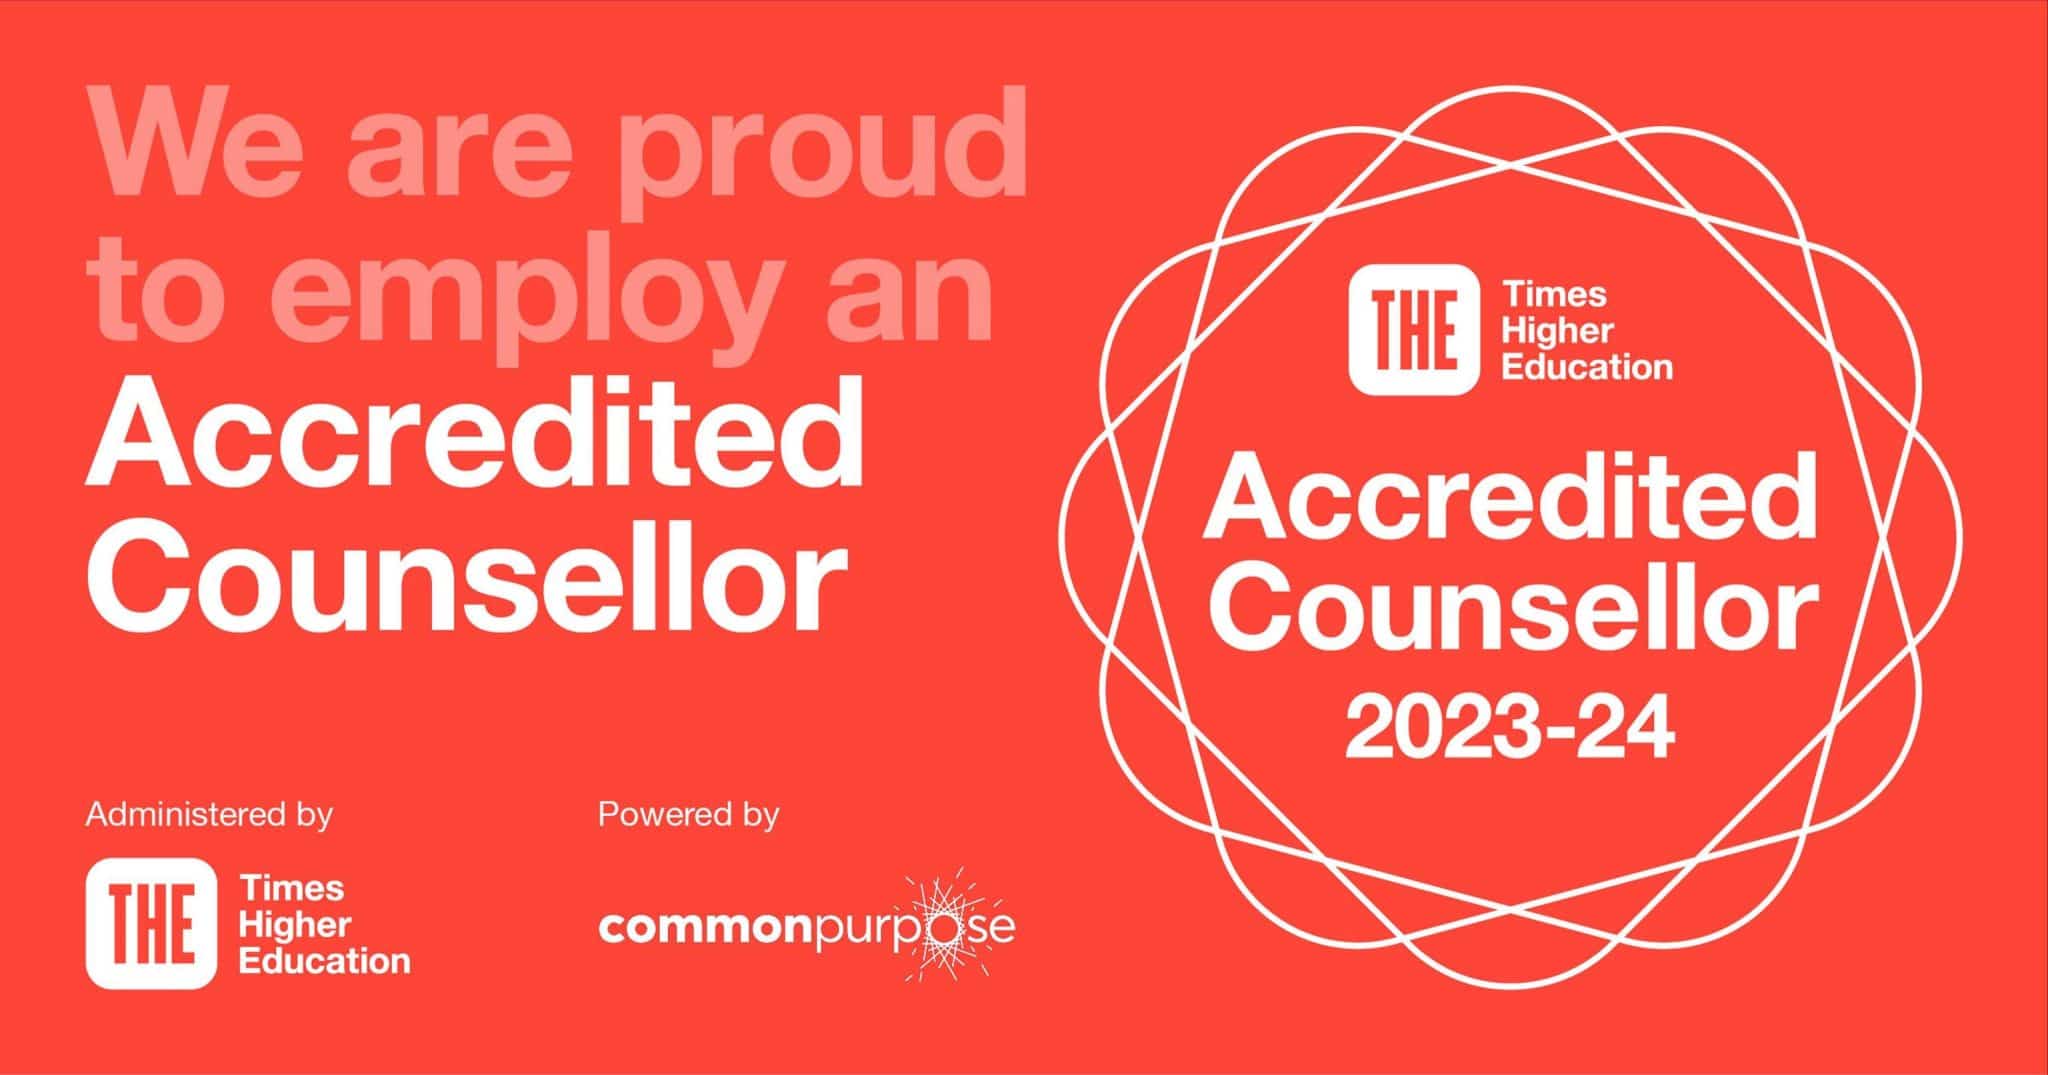 Times Higher Education Accredited Counsellor